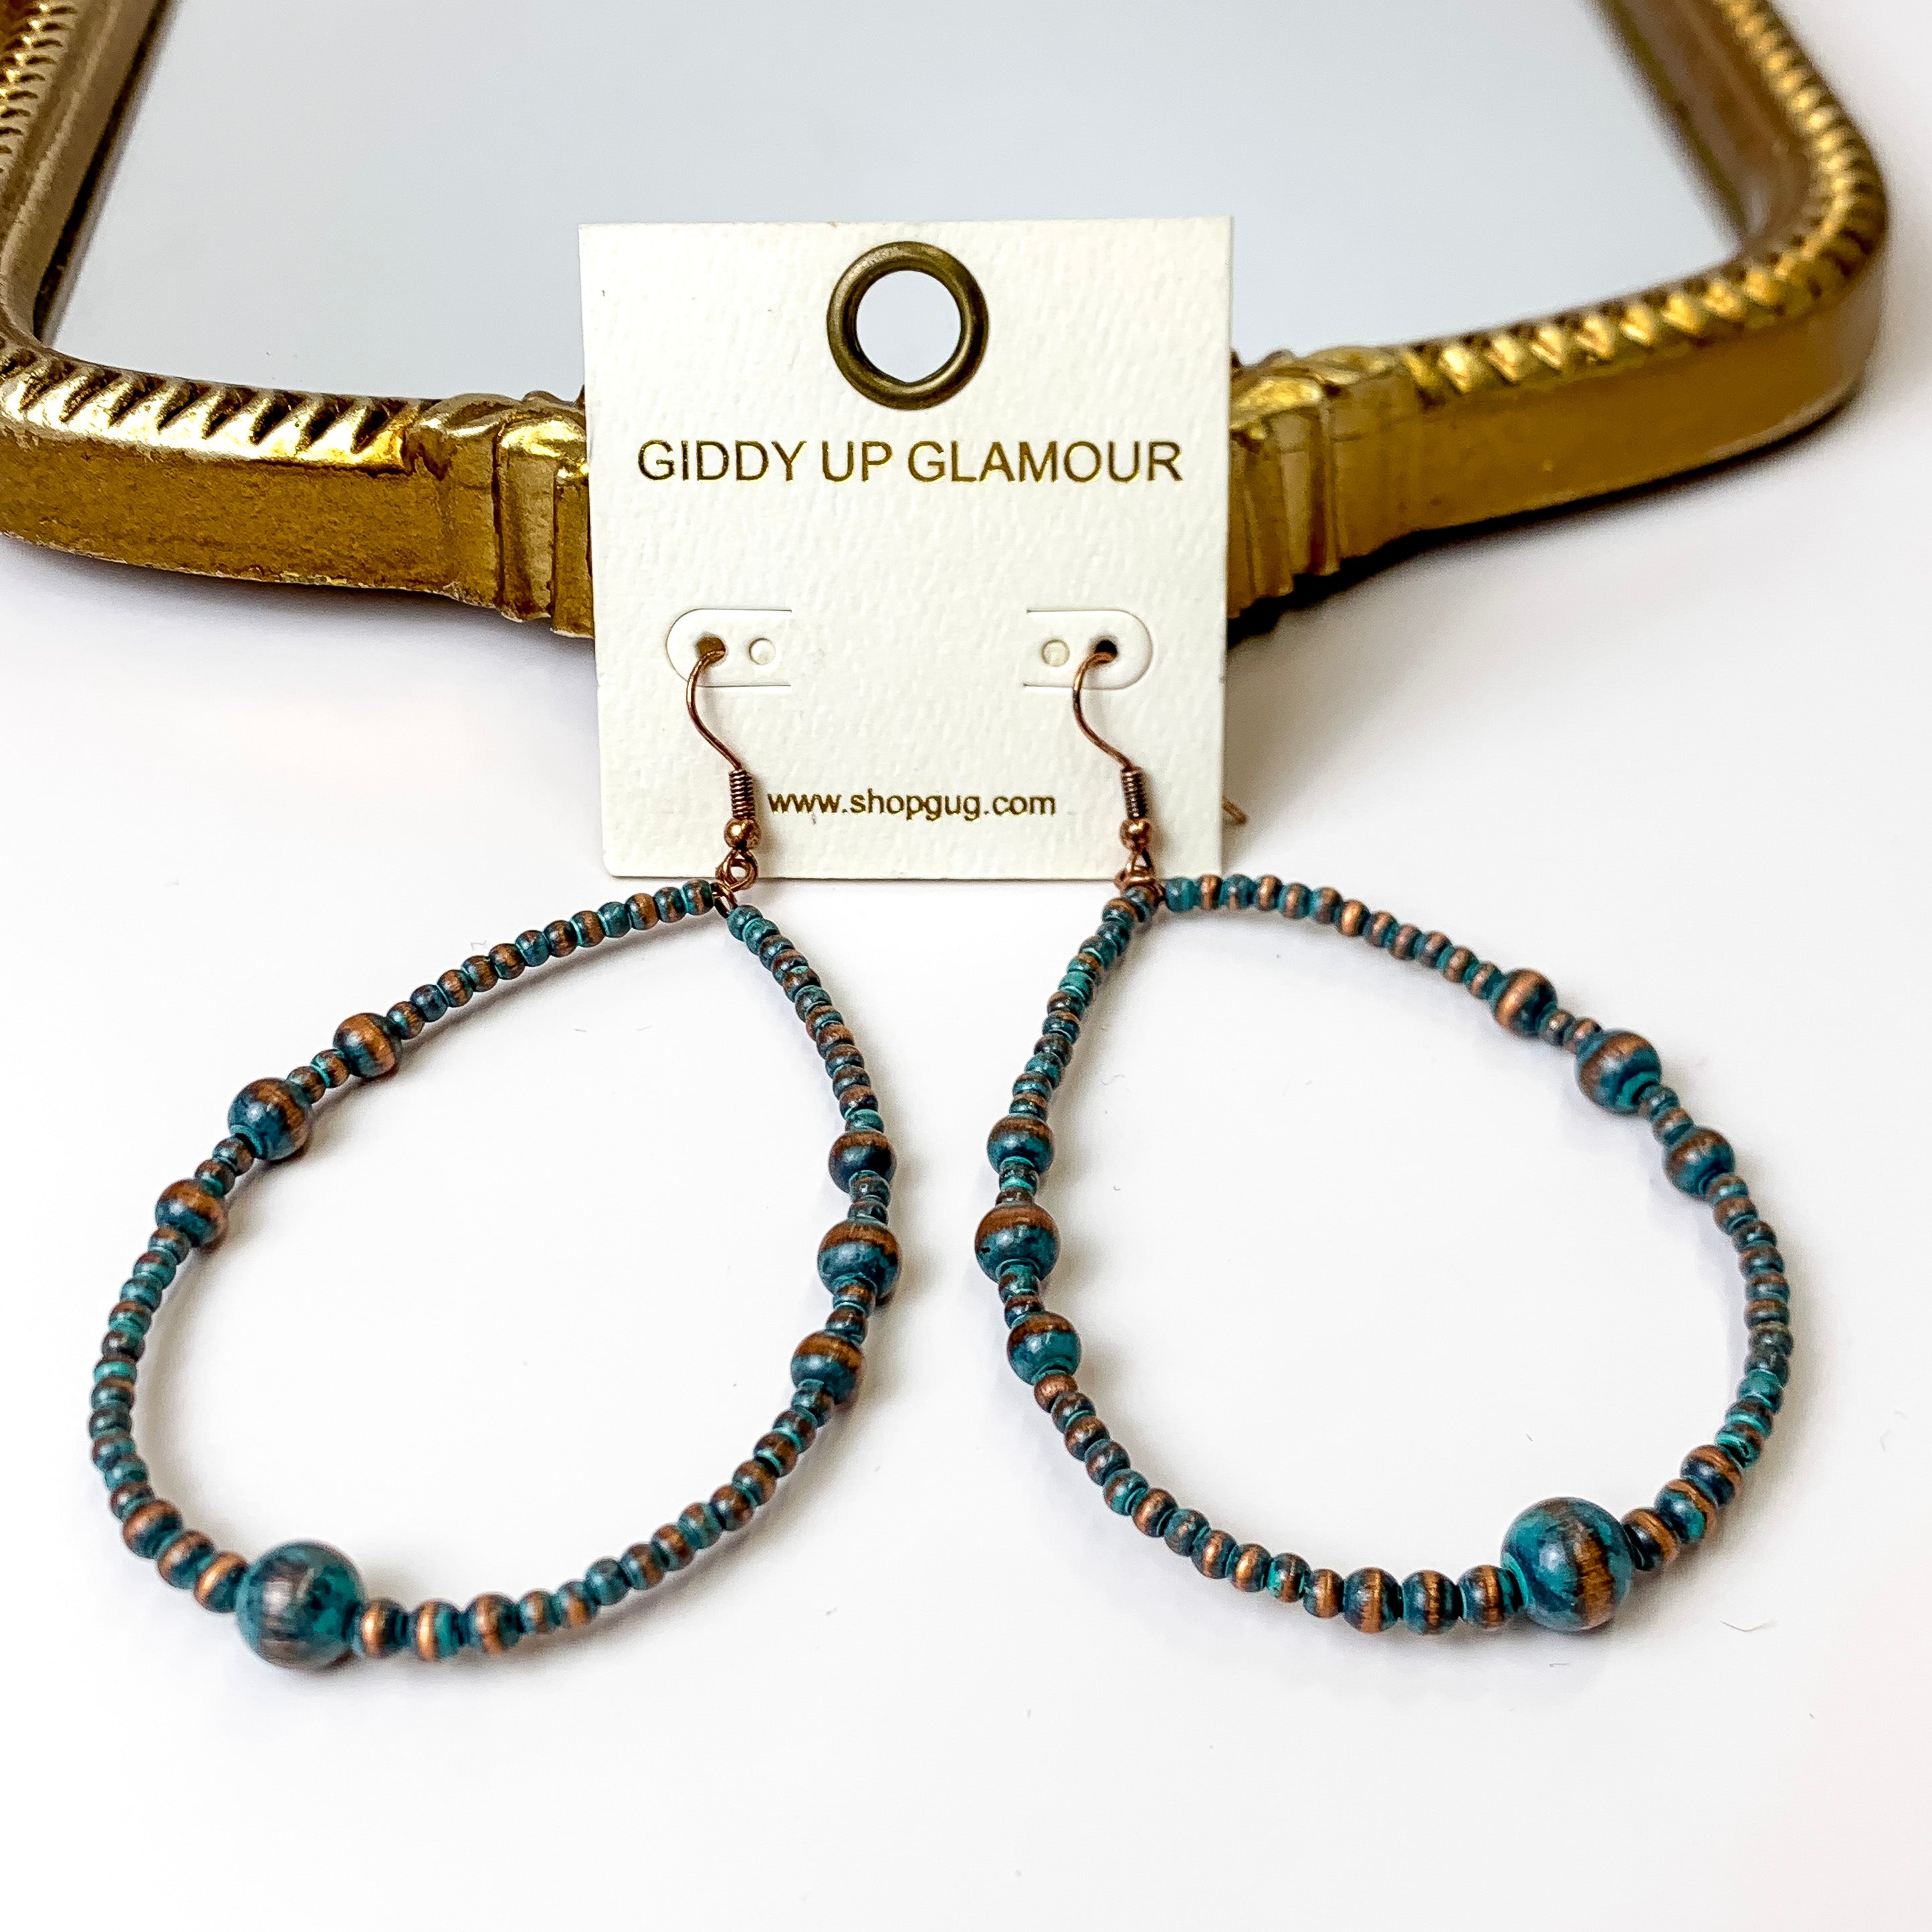 Beaded Open Teardrop Earrings in Patina Tone - Giddy Up Glamour Boutique